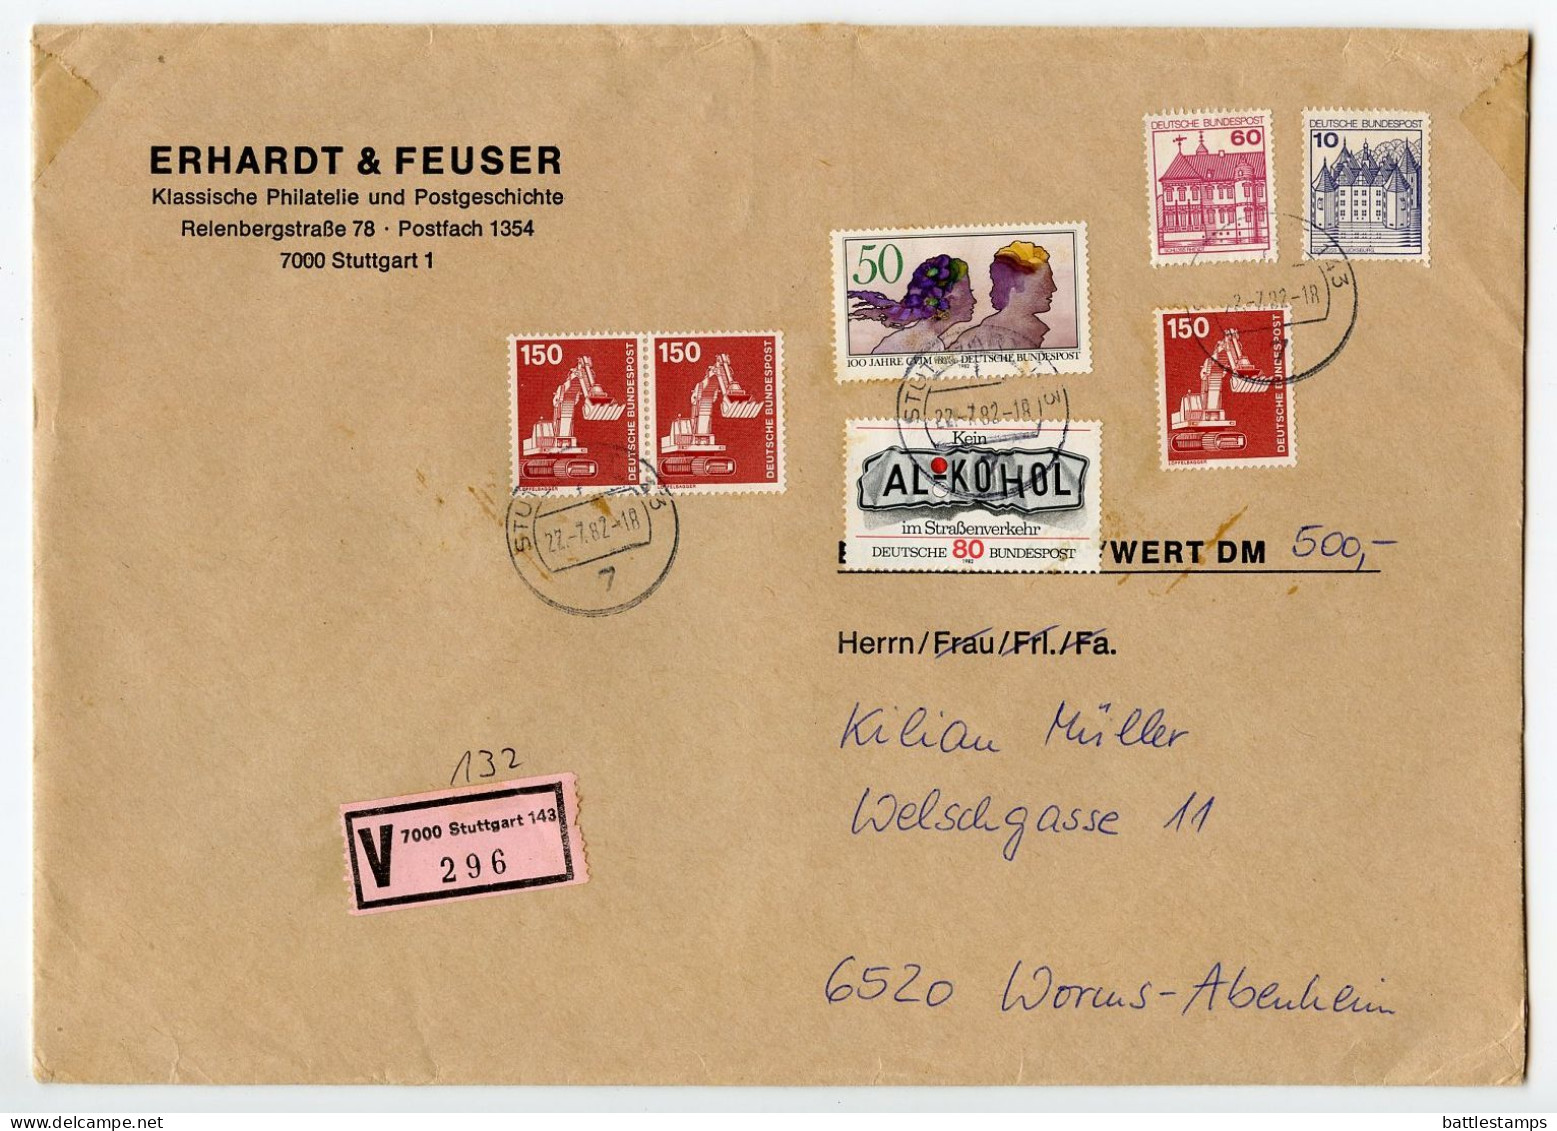 Germany, West 1982 Insured V-Label Cover; Stuttgart To Worms-Abenheim; Mix Of Stamps - Lettres & Documents